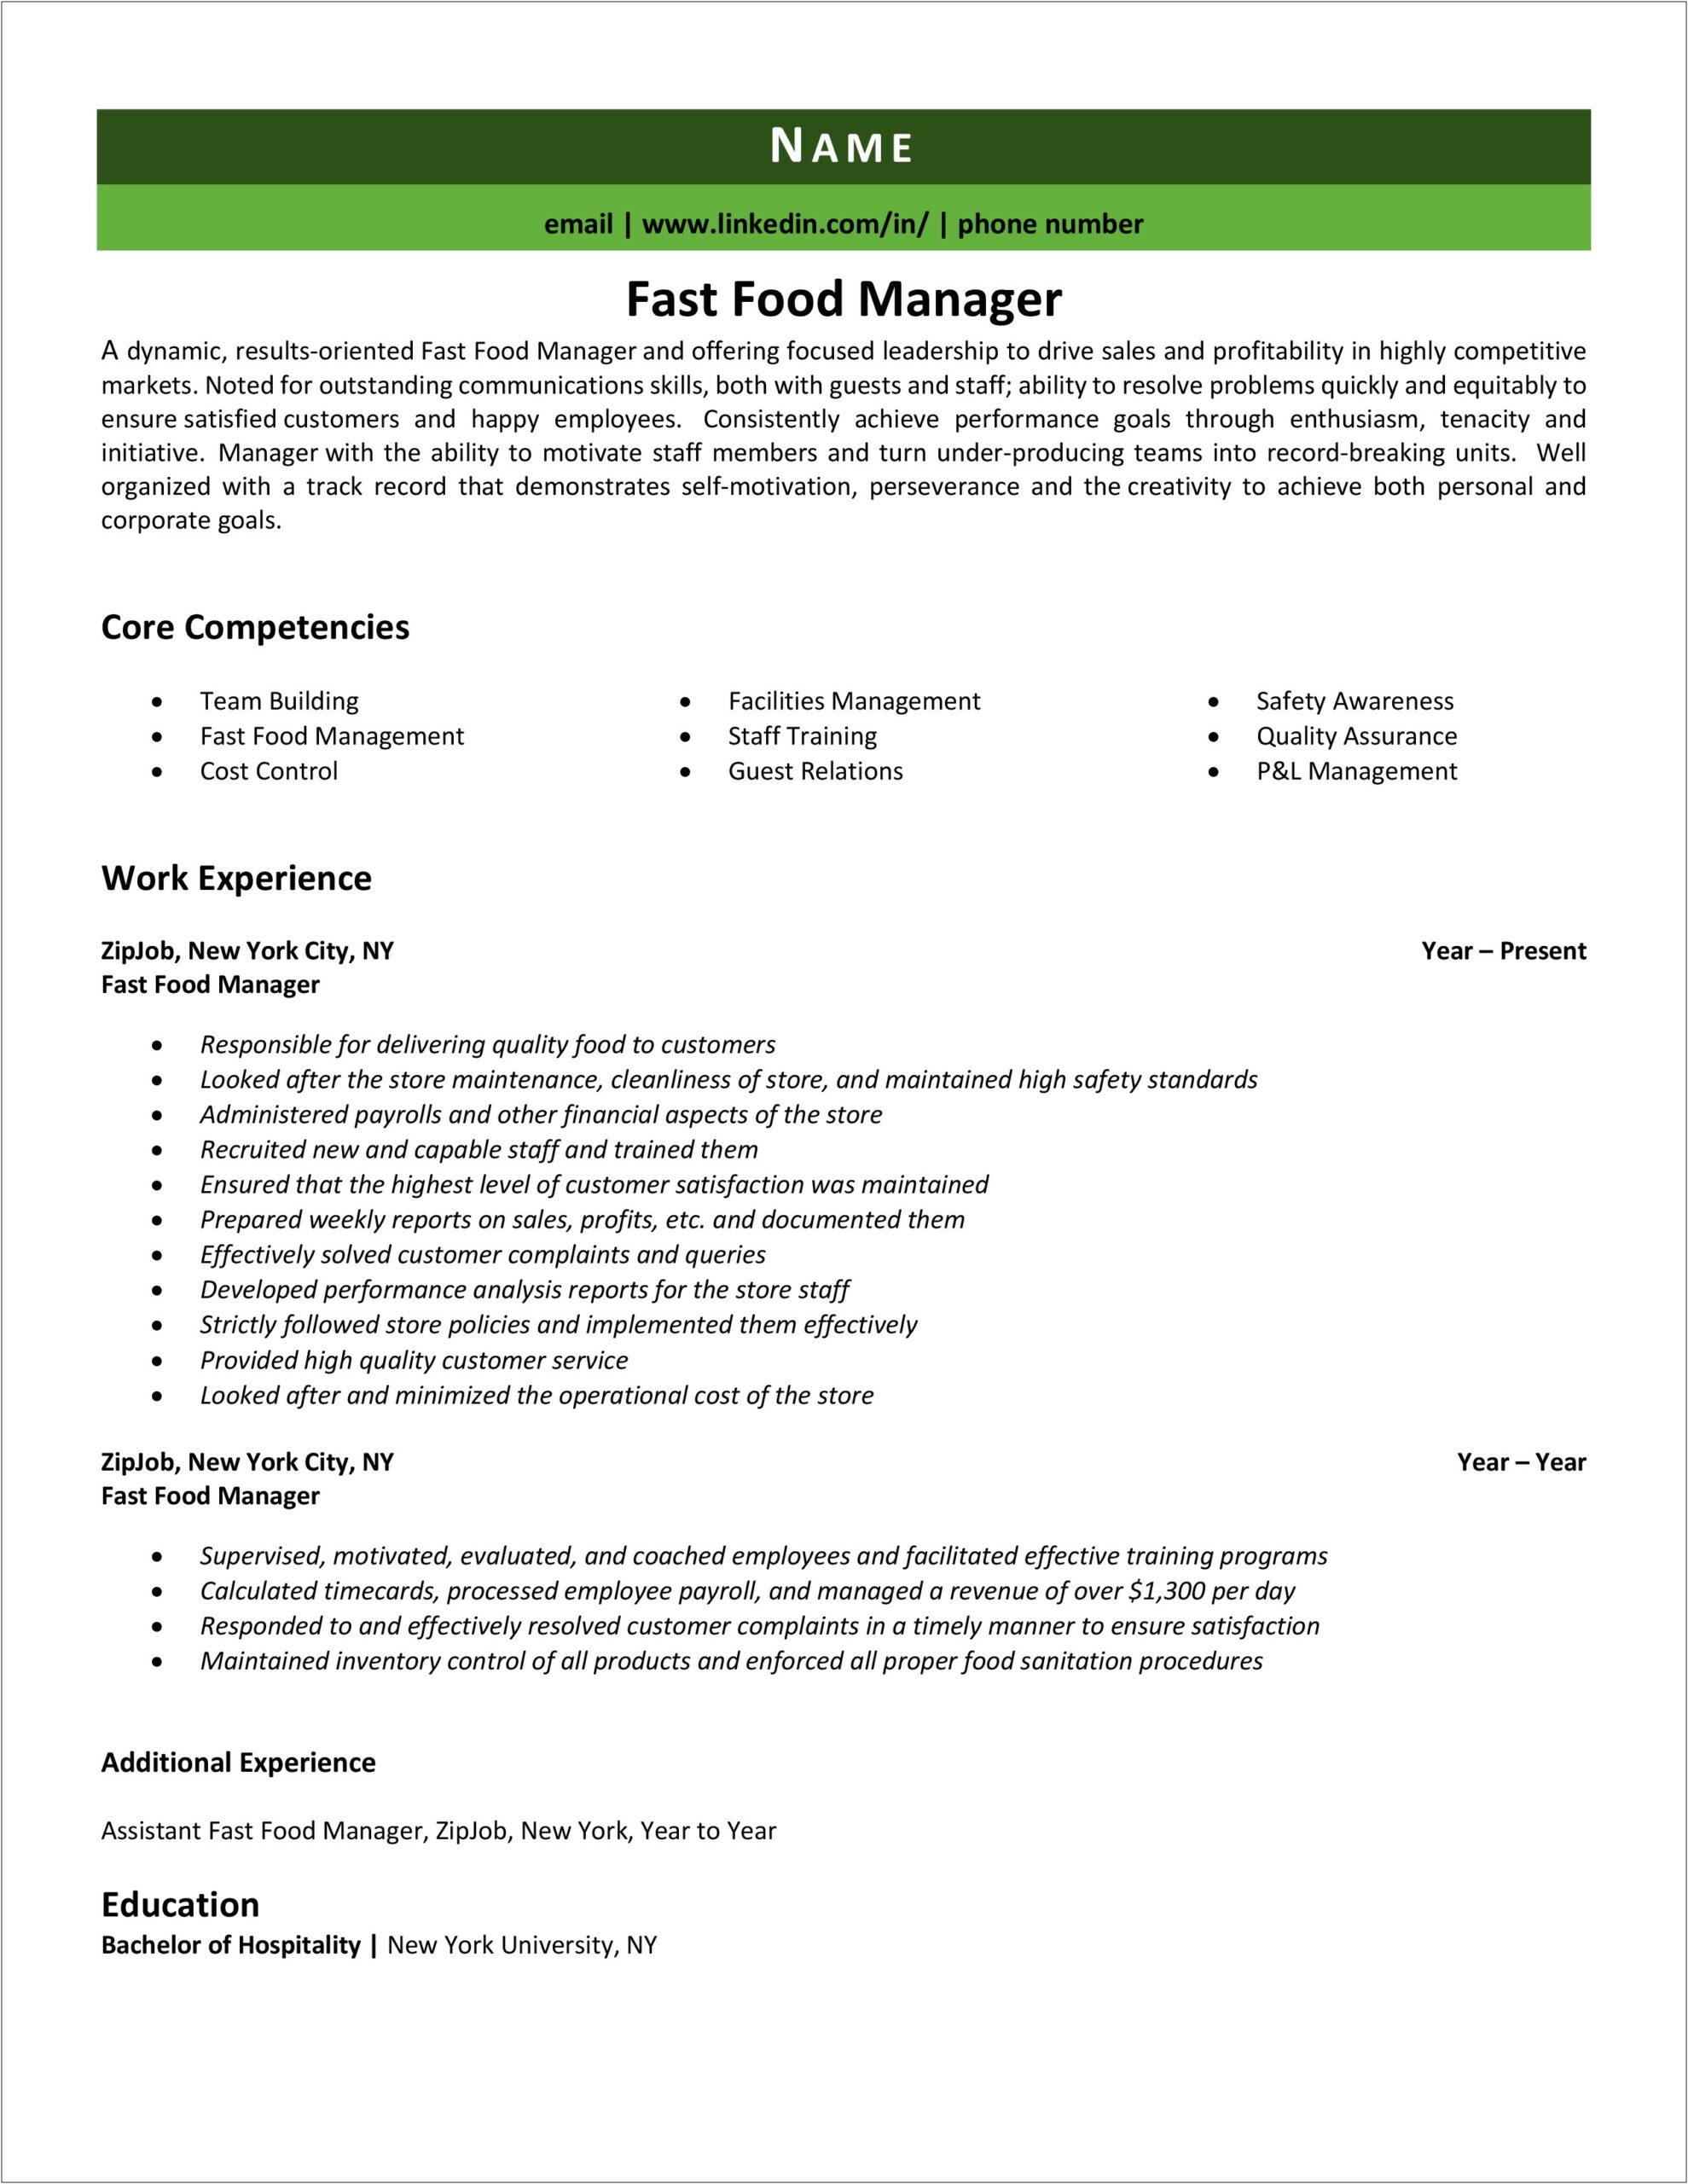 Resume For Fast Food Assistant Manager